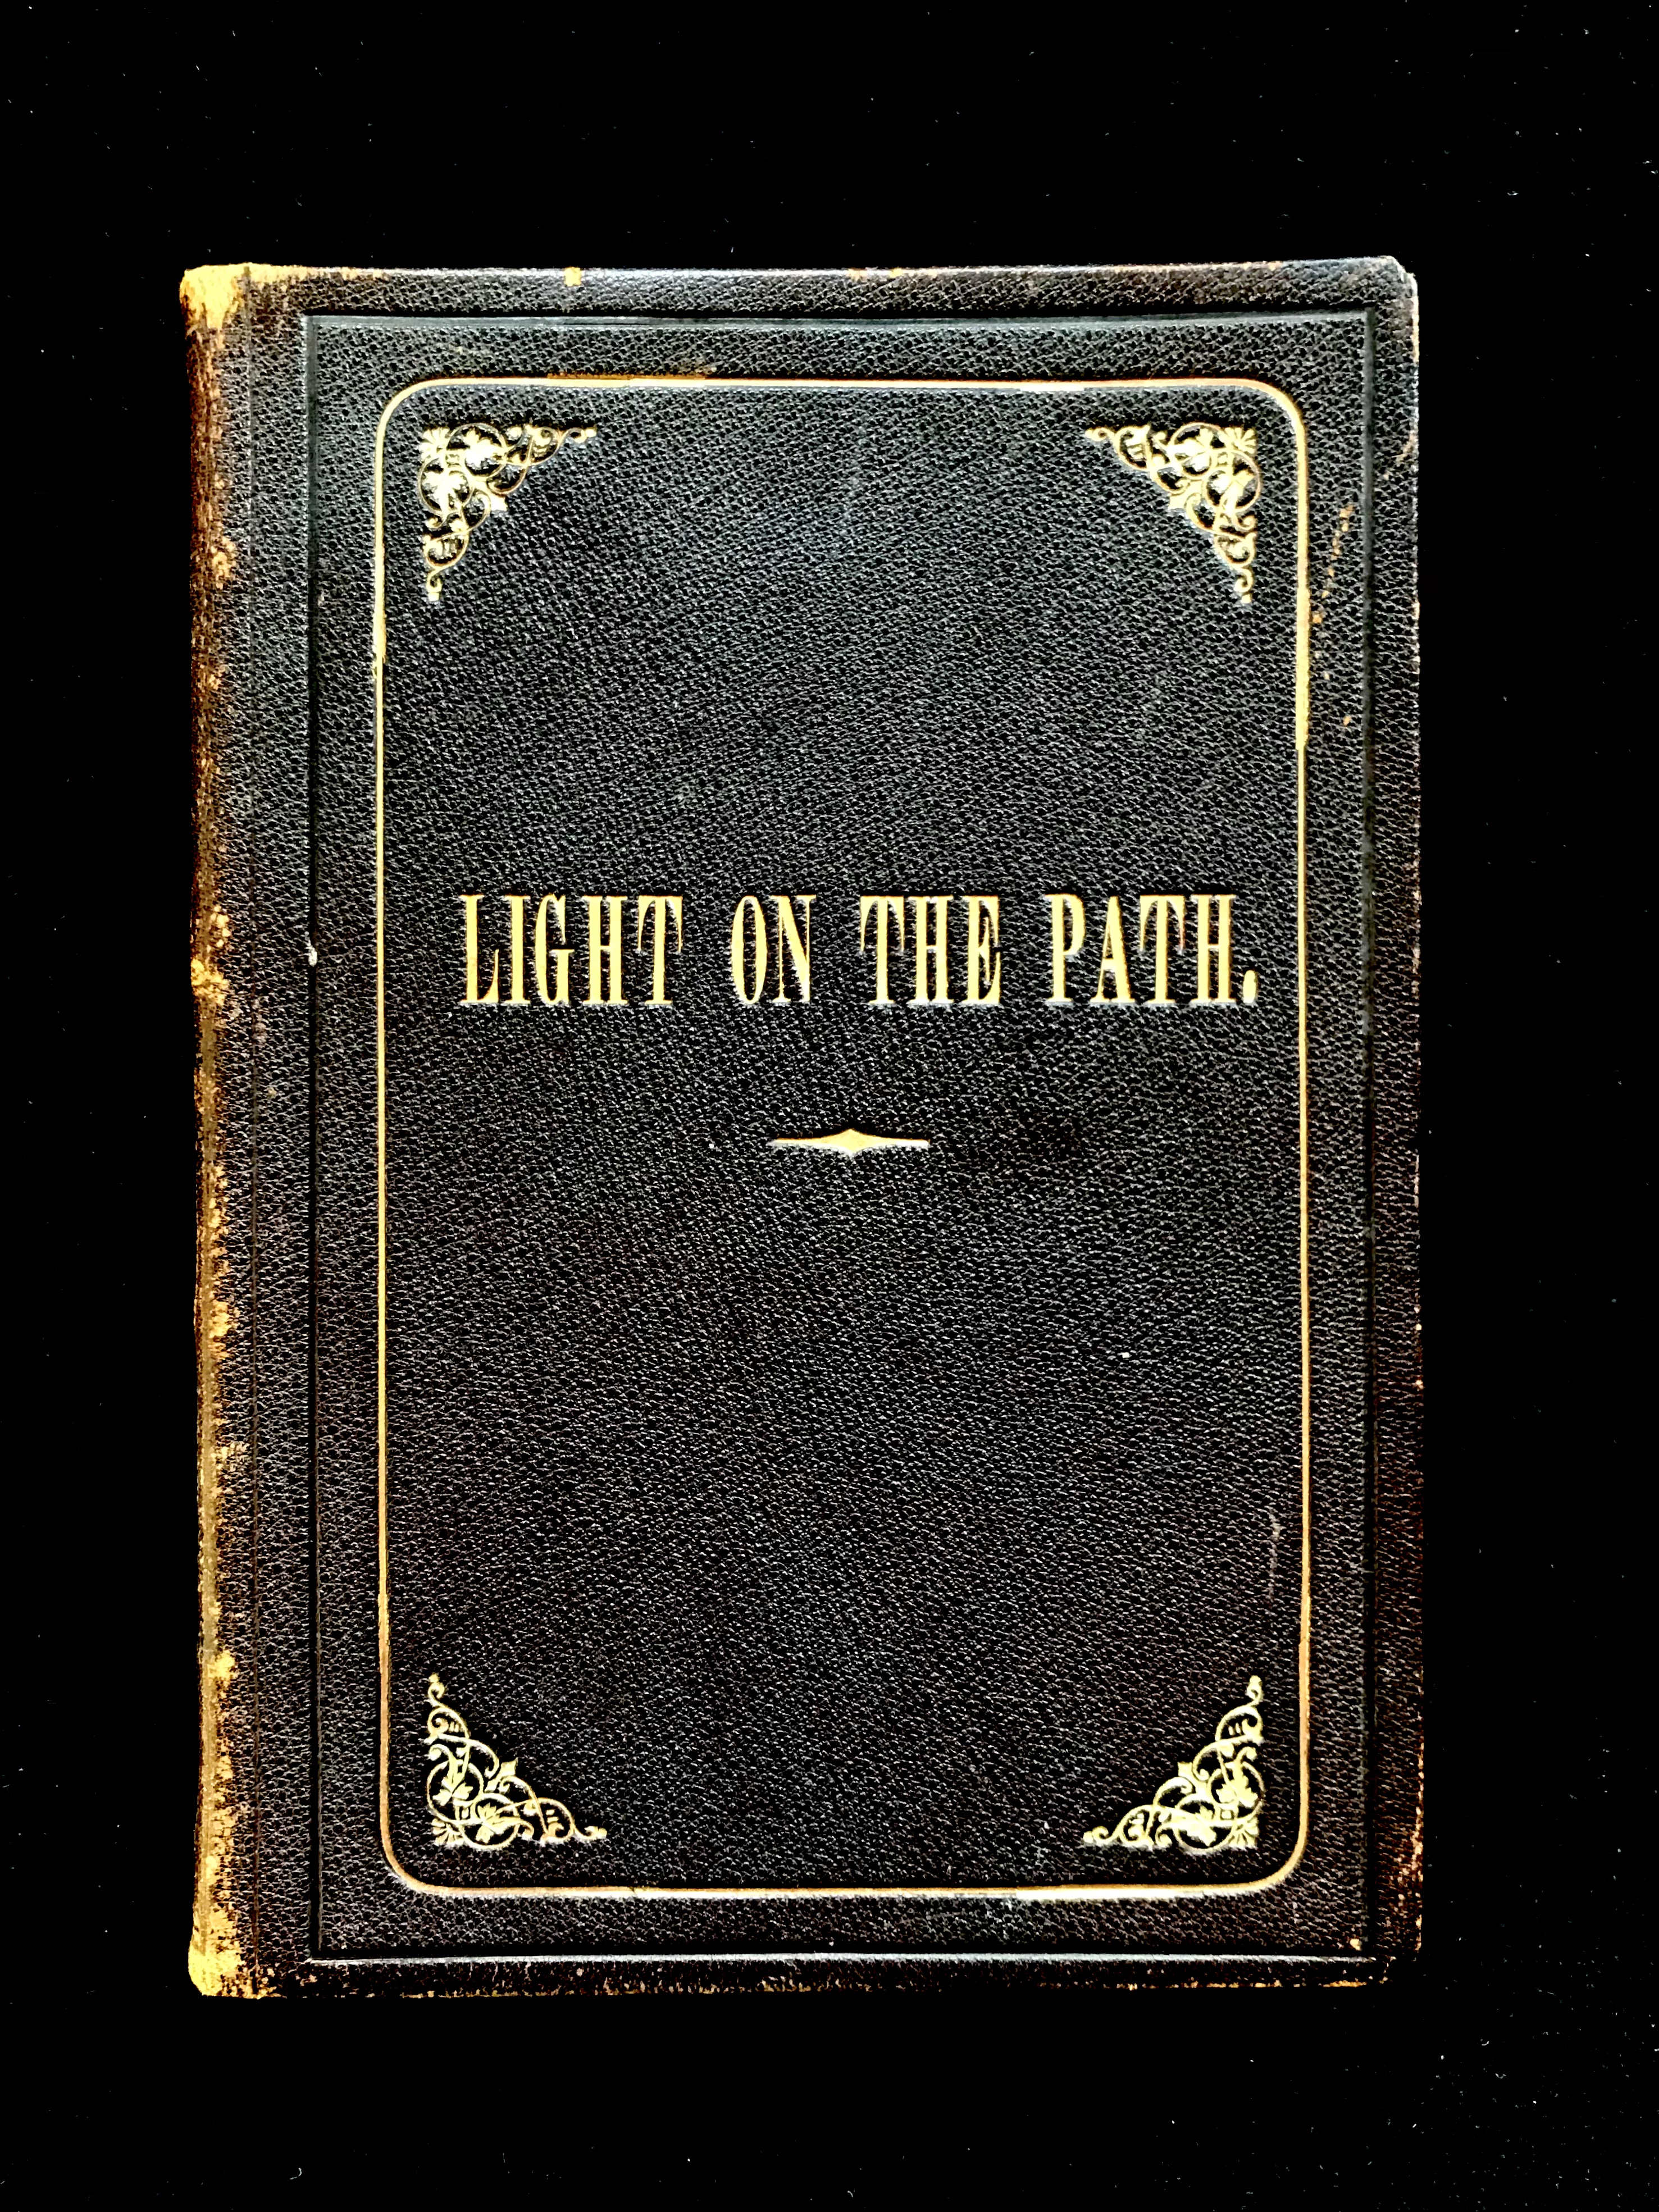 Light On The Path by M. C.